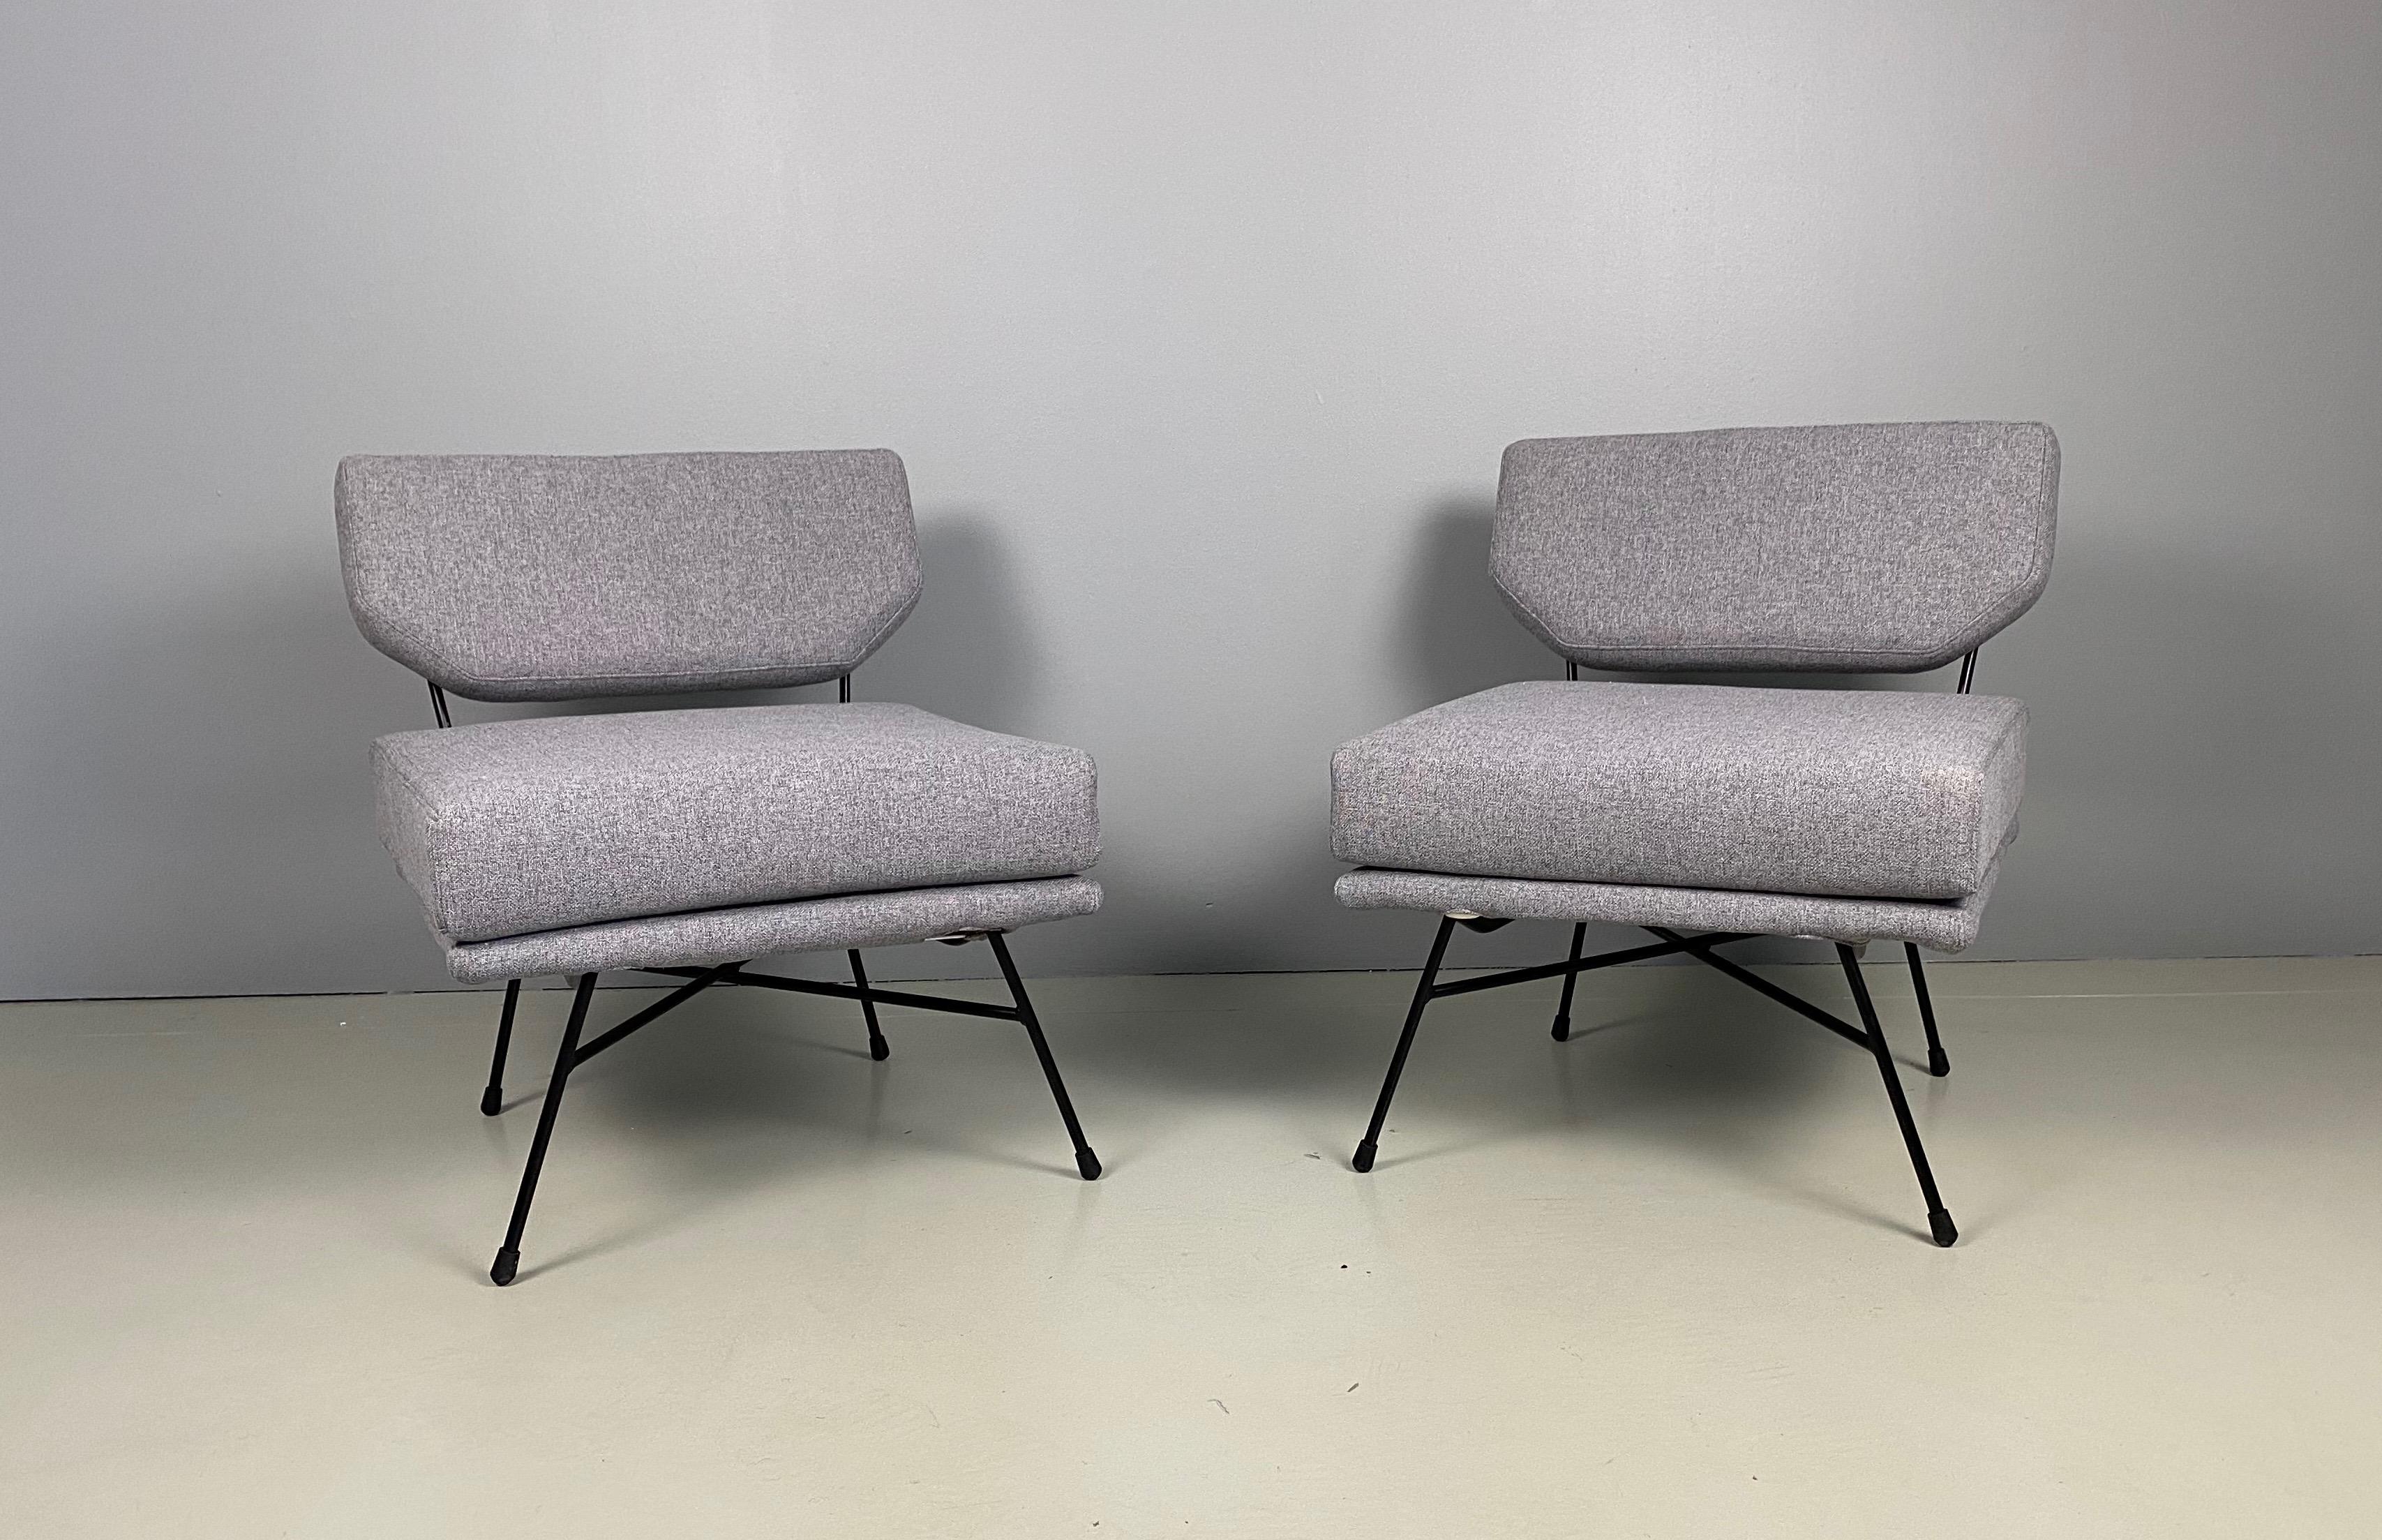 Iron Pair of 'Elettra' Lounge Chairs by BBPR, Arflex, Italy 1953, Compasso D'Oro 1954